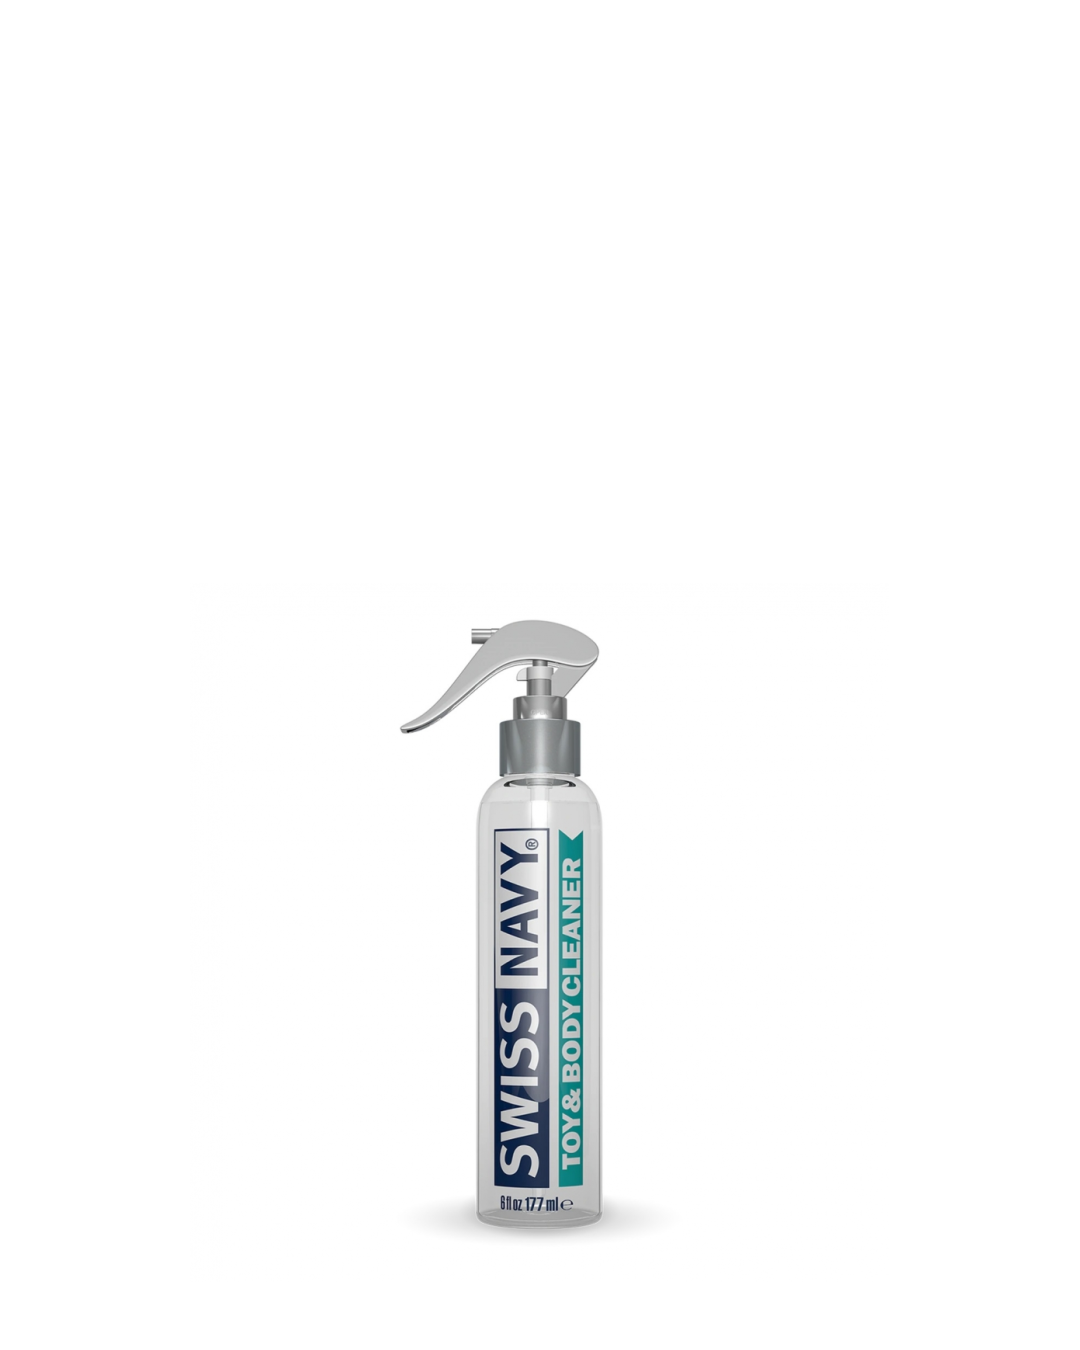 Swiss Navy Premium Toy & Body Cleaner 6oz (177ml) clear bottle blue writing